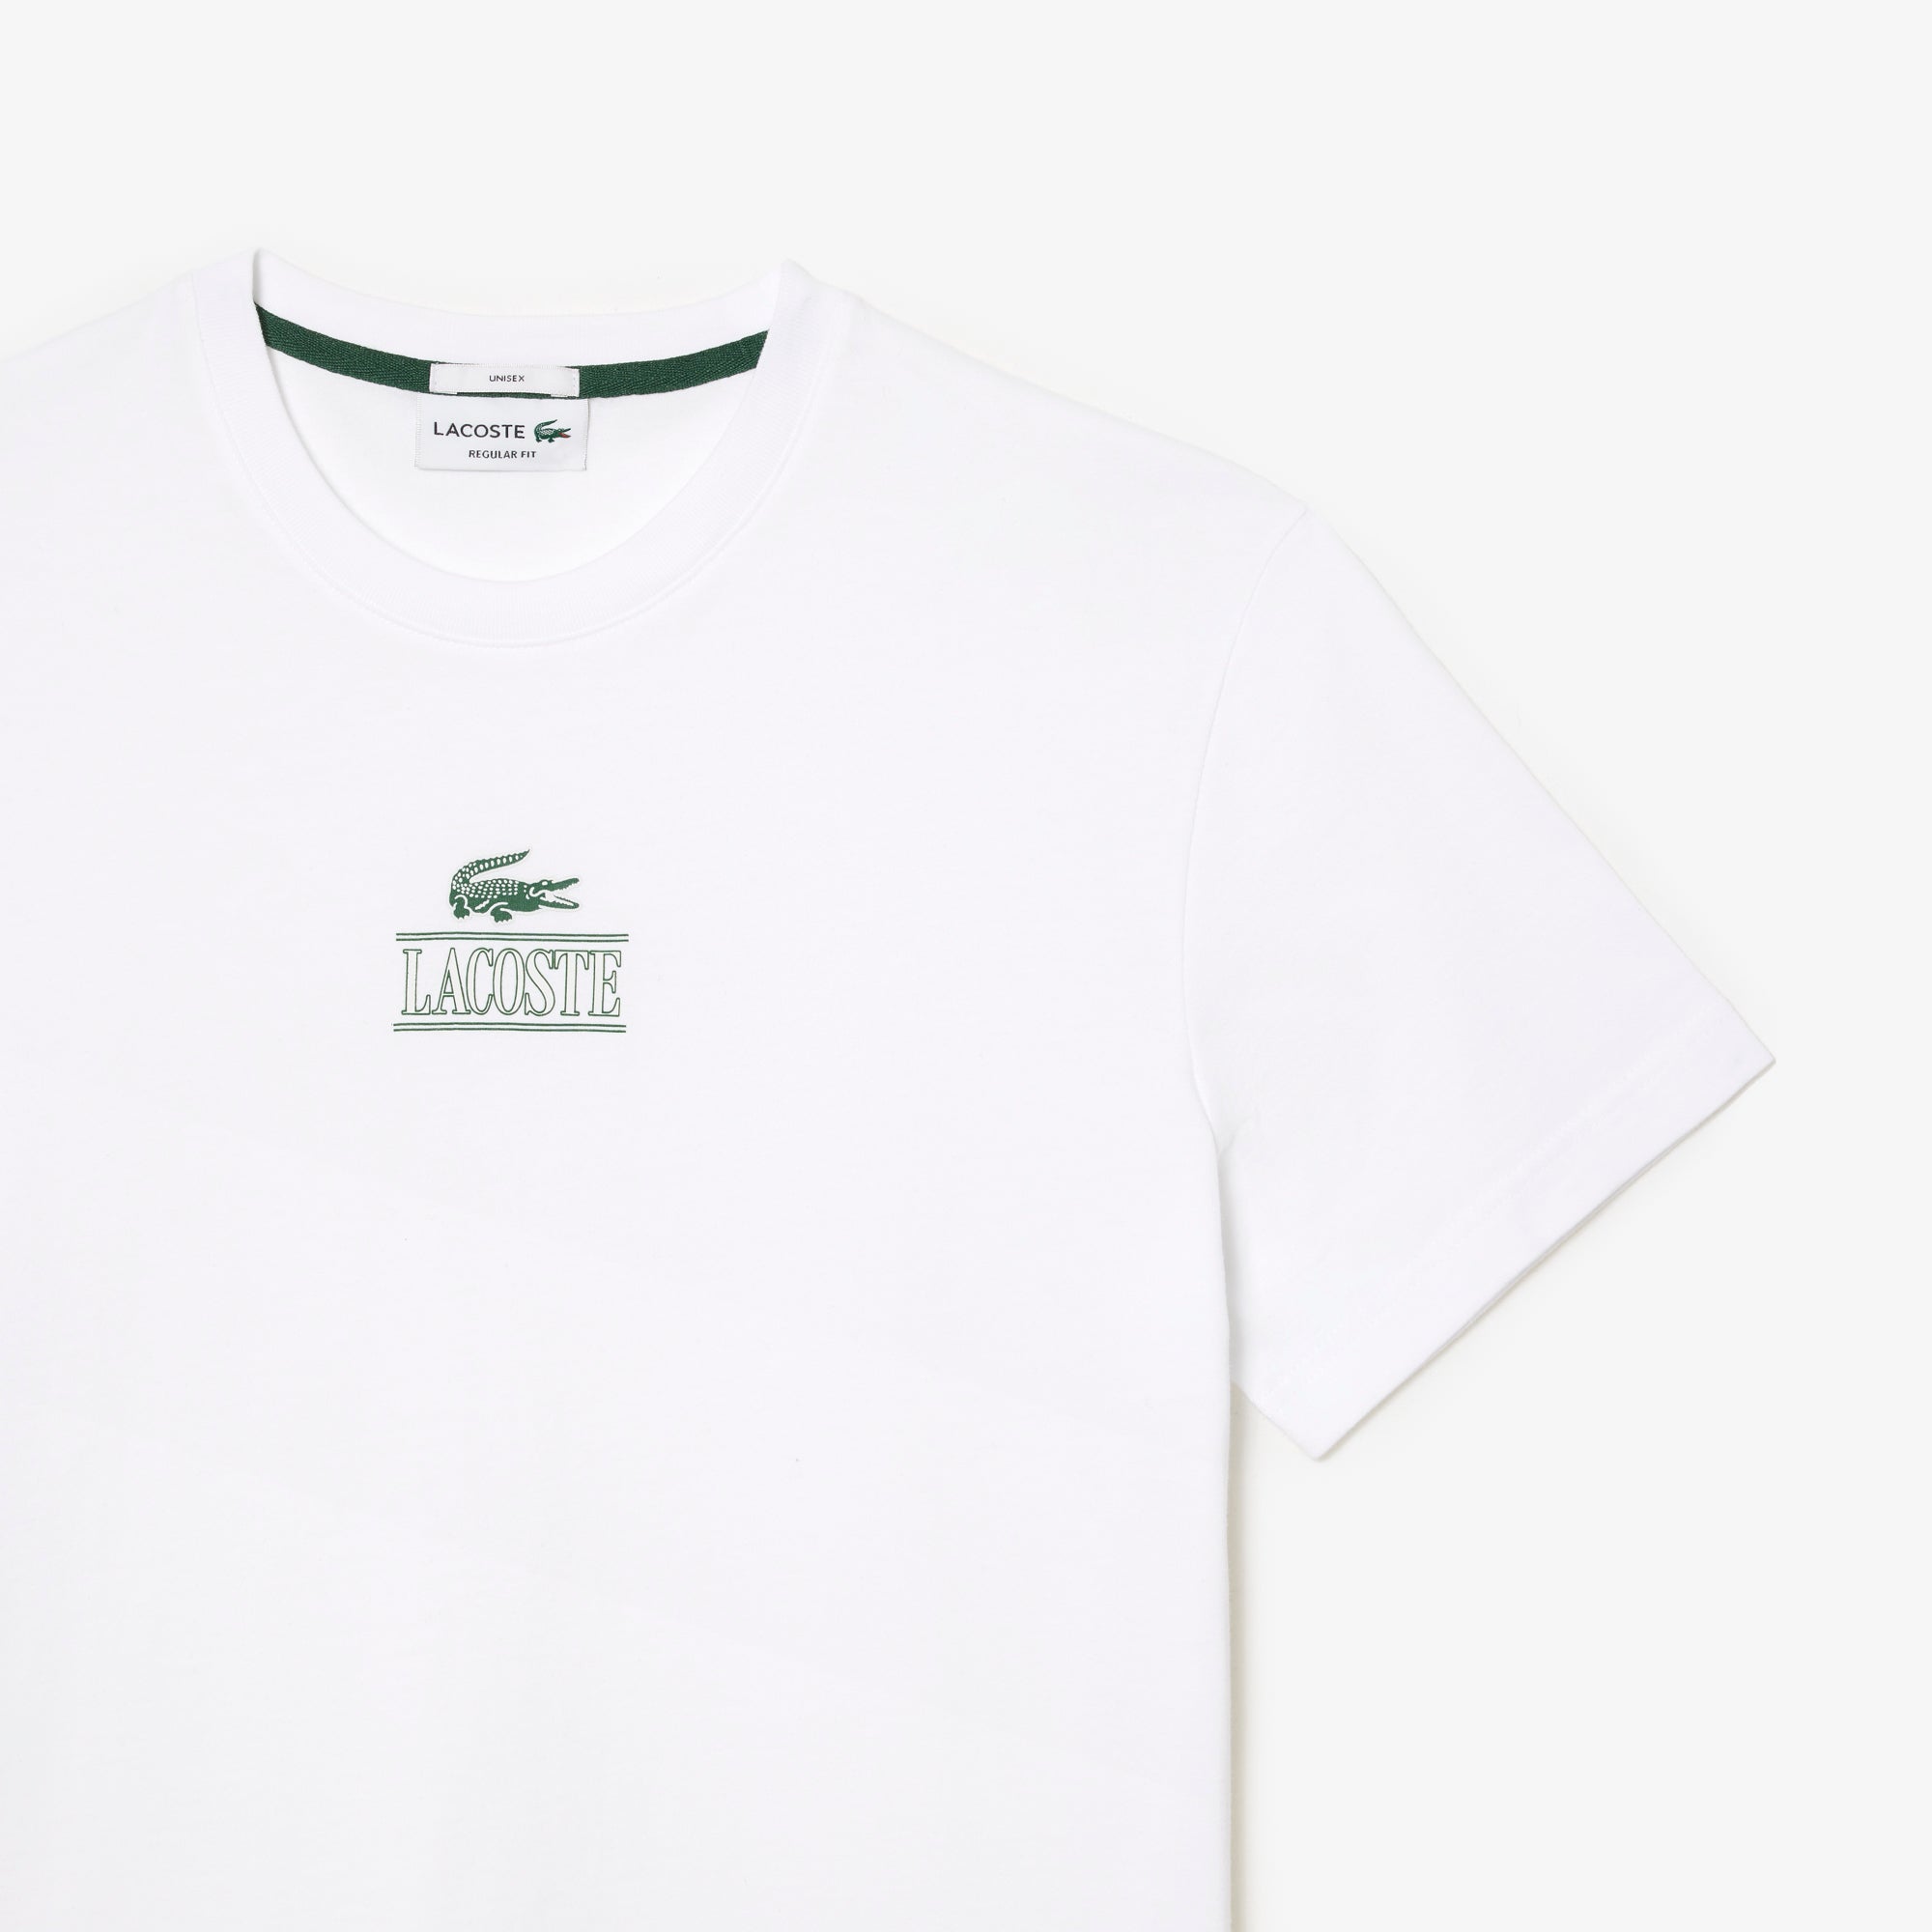 Lacoste Unisex Regular Fit Cotton Jersey Branded T-Shirt White TH1147 001